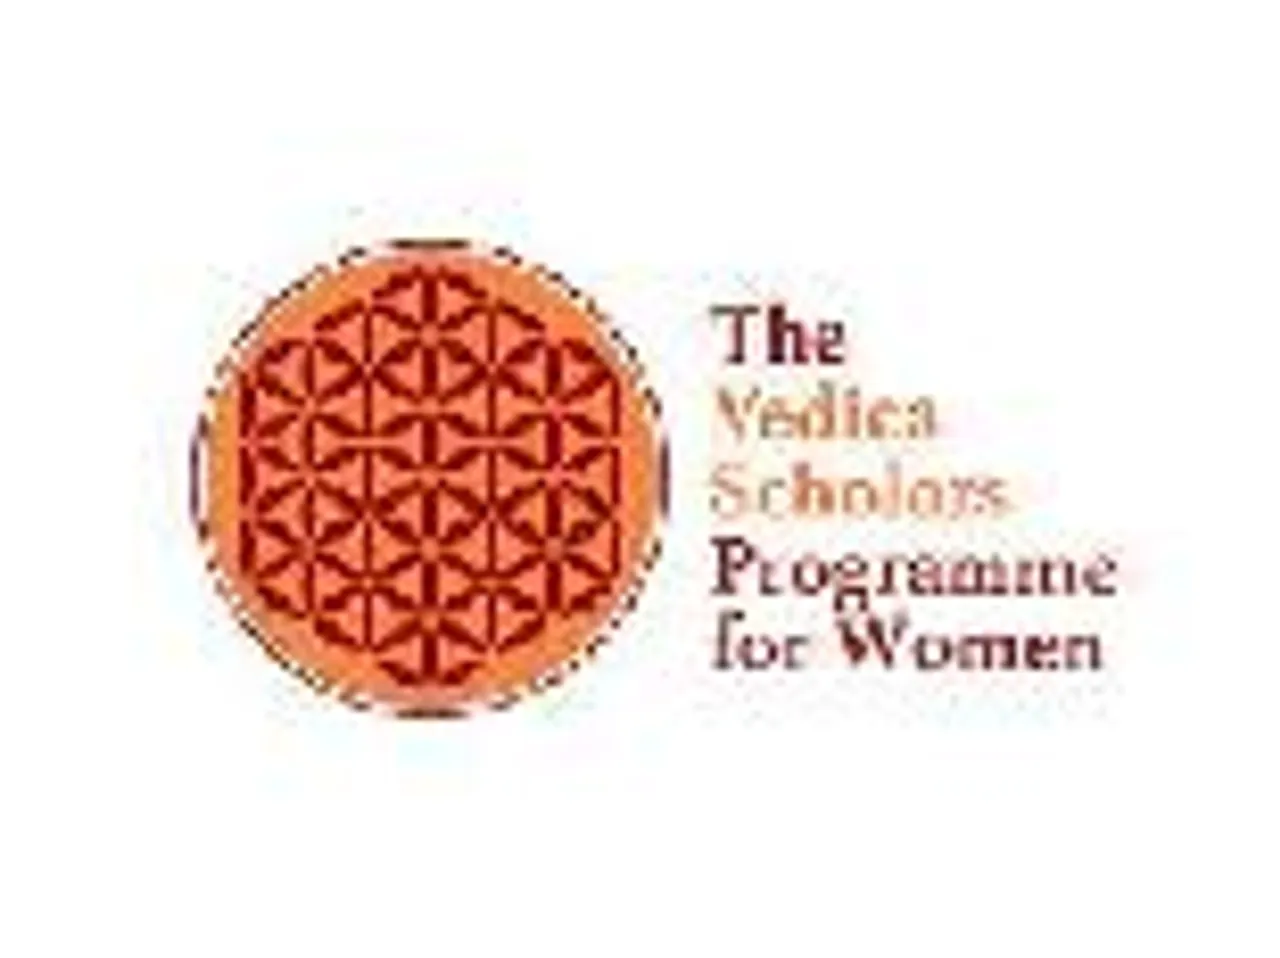 Vedica Foundation - Only Indian Organisation in the Inaugural Cohort of AOF Grantees